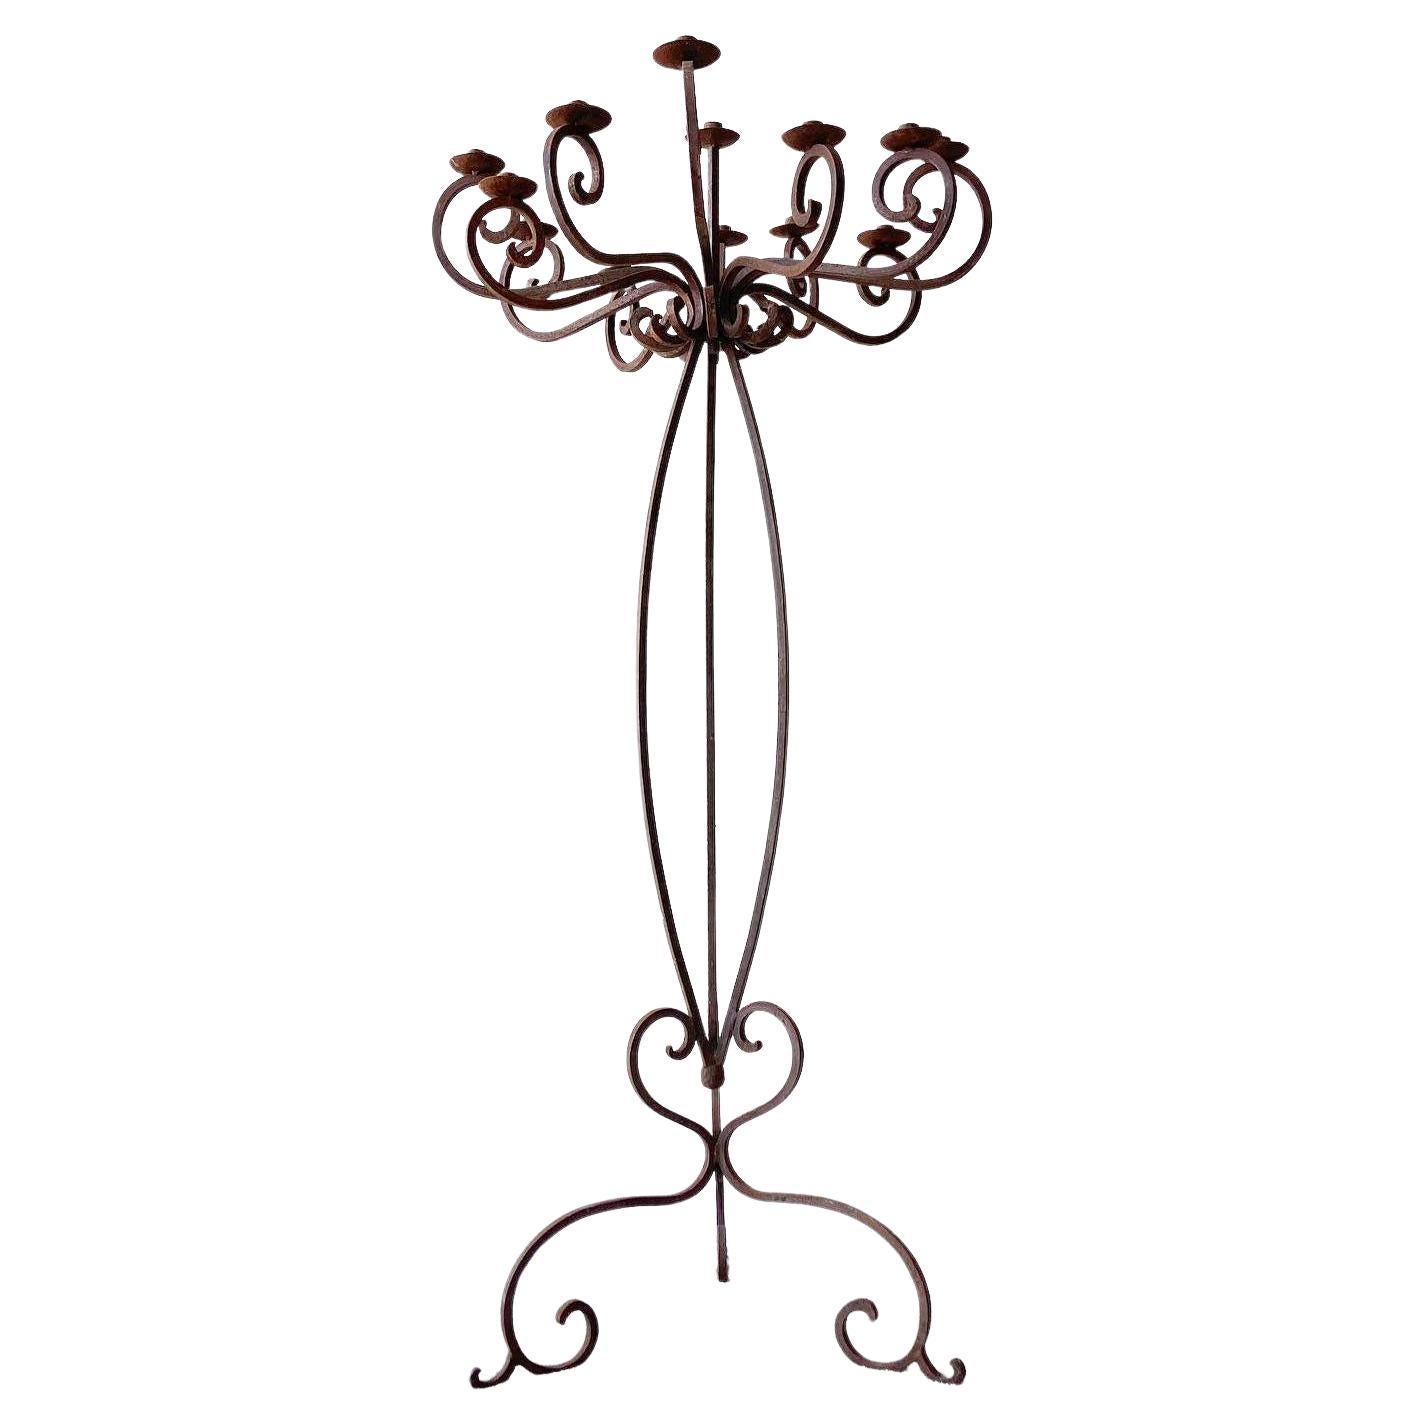 Victorian Style Cast Iron Floor Candelabra - 13 Cups For Sale